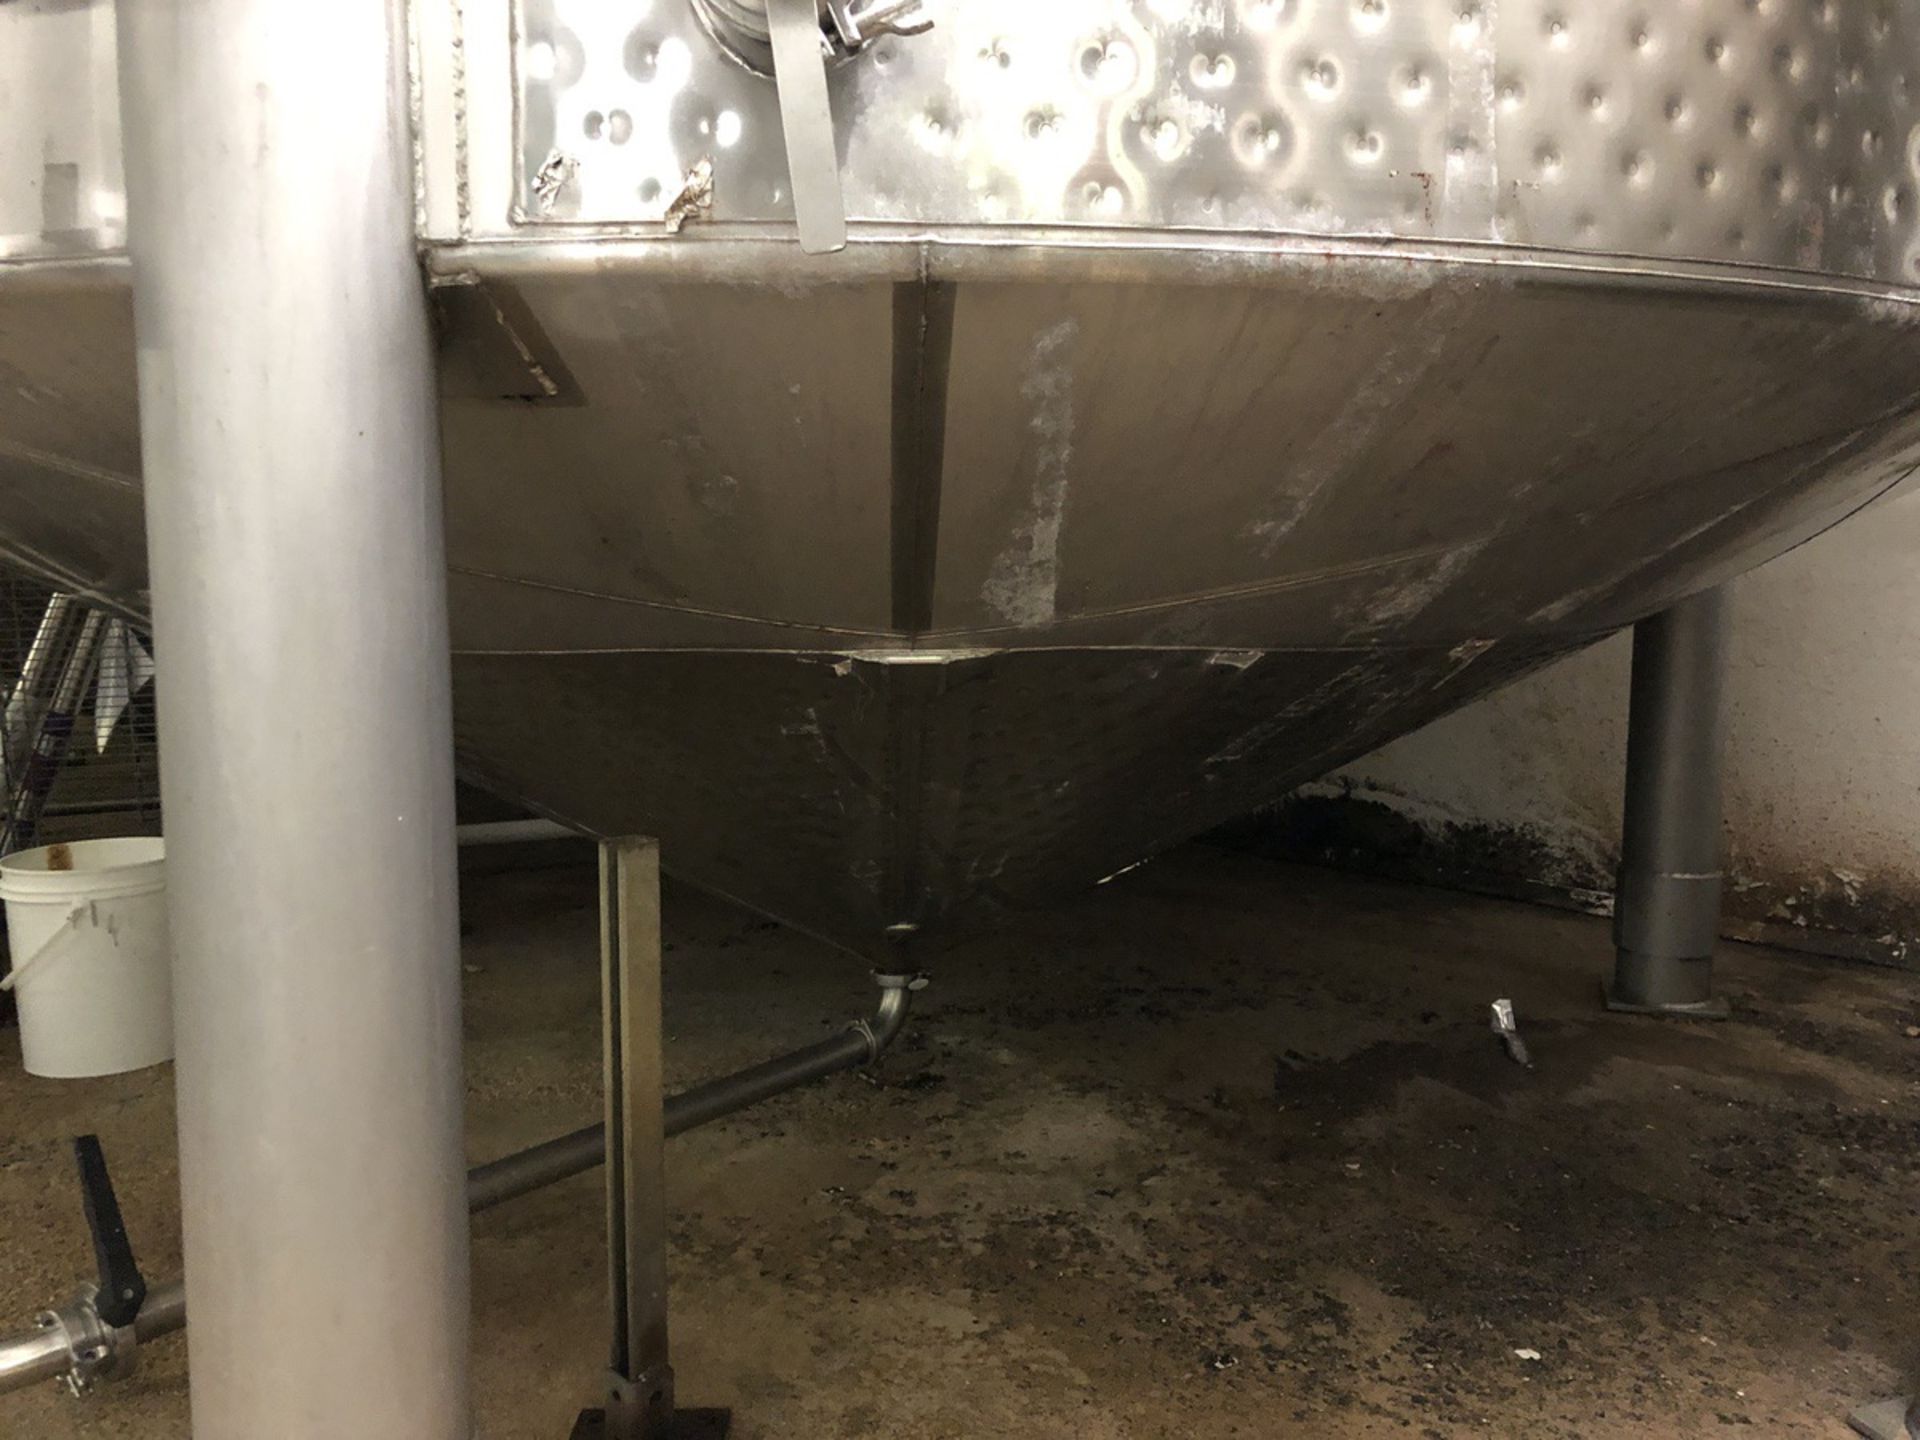 Santa Rosa 100 BBL Fermenter, Cone Bottom, Glycol Dimple Jacketed, Stainless Steel, | Rig Fee: $2000 - Image 5 of 10